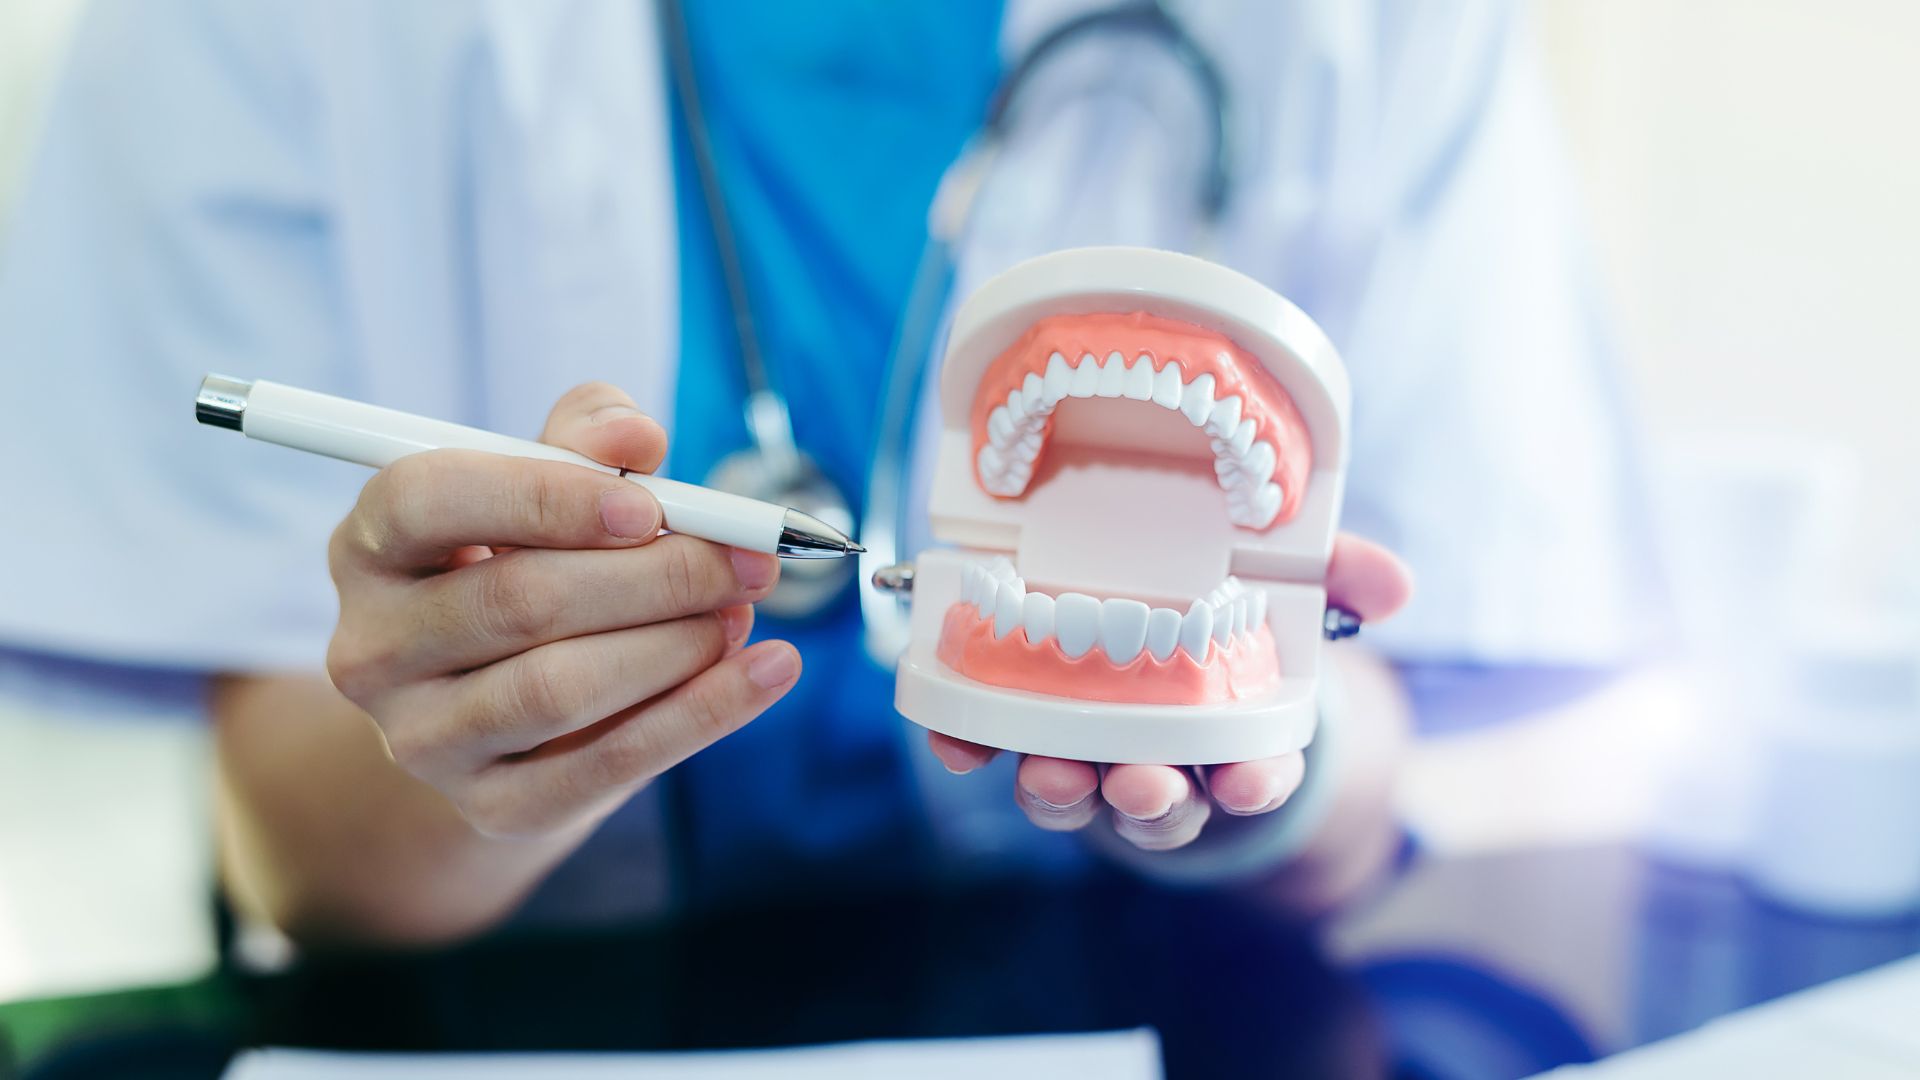 7 signs that you are at risk of losing your teeth and what to do to avoid it